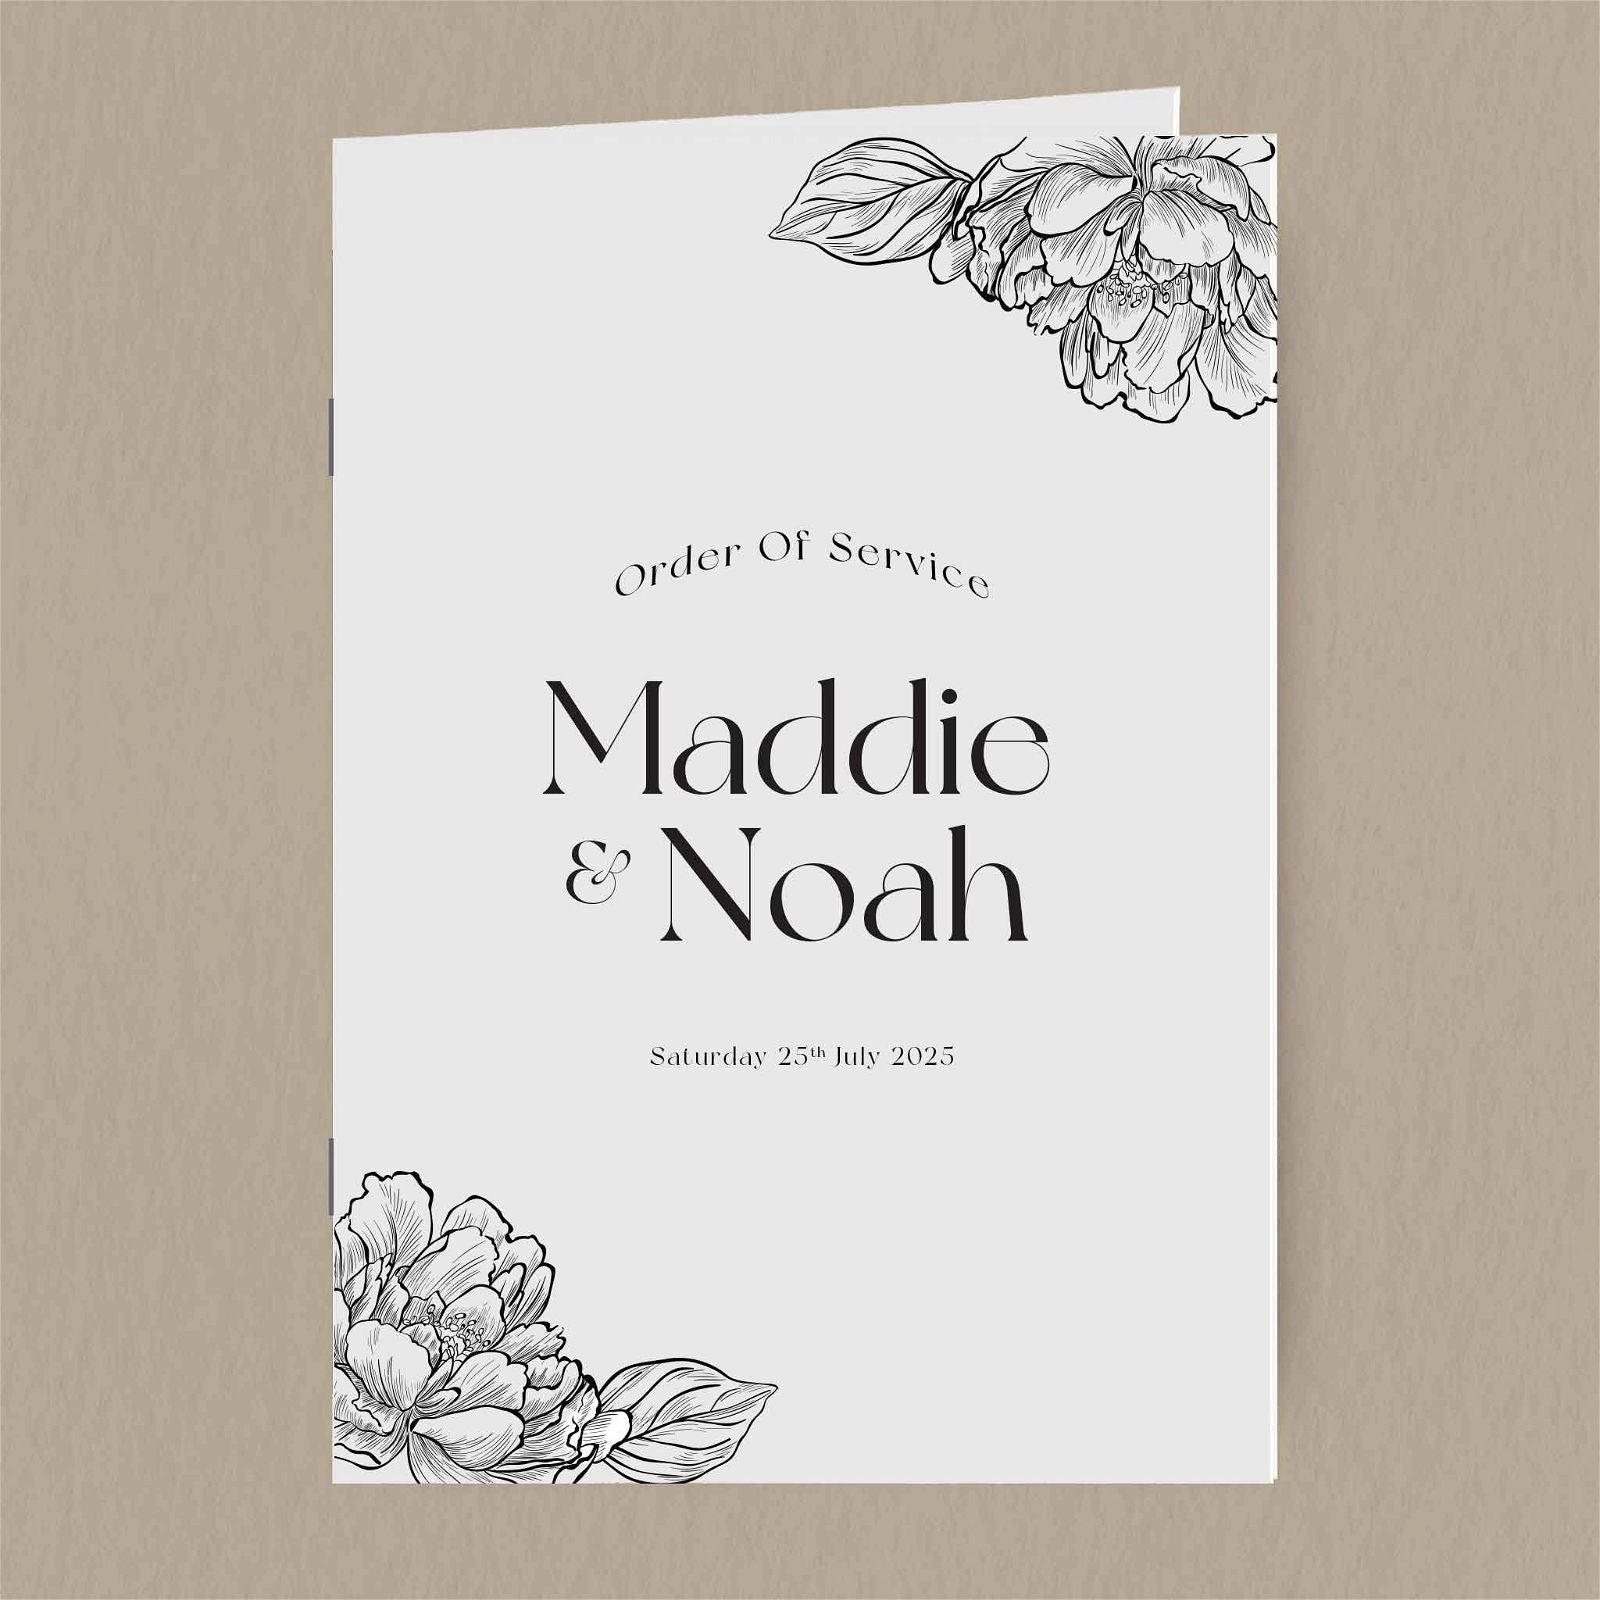 Maddie Order Of Service  Ivy and Gold Wedding Stationery   